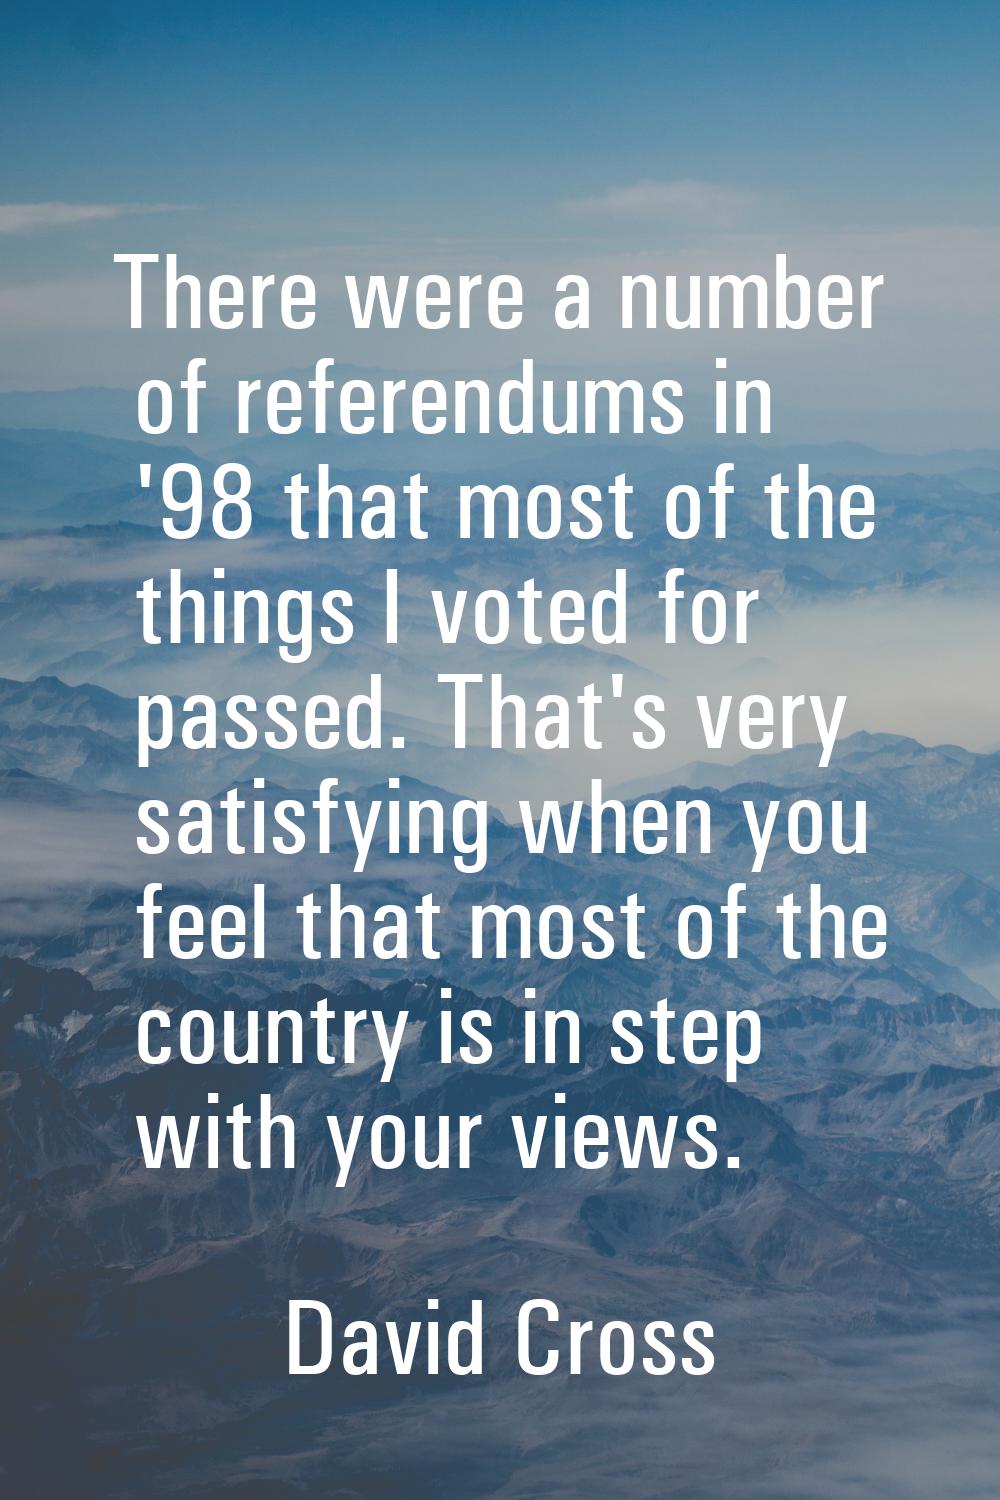 There were a number of referendums in '98 that most of the things I voted for passed. That's very s